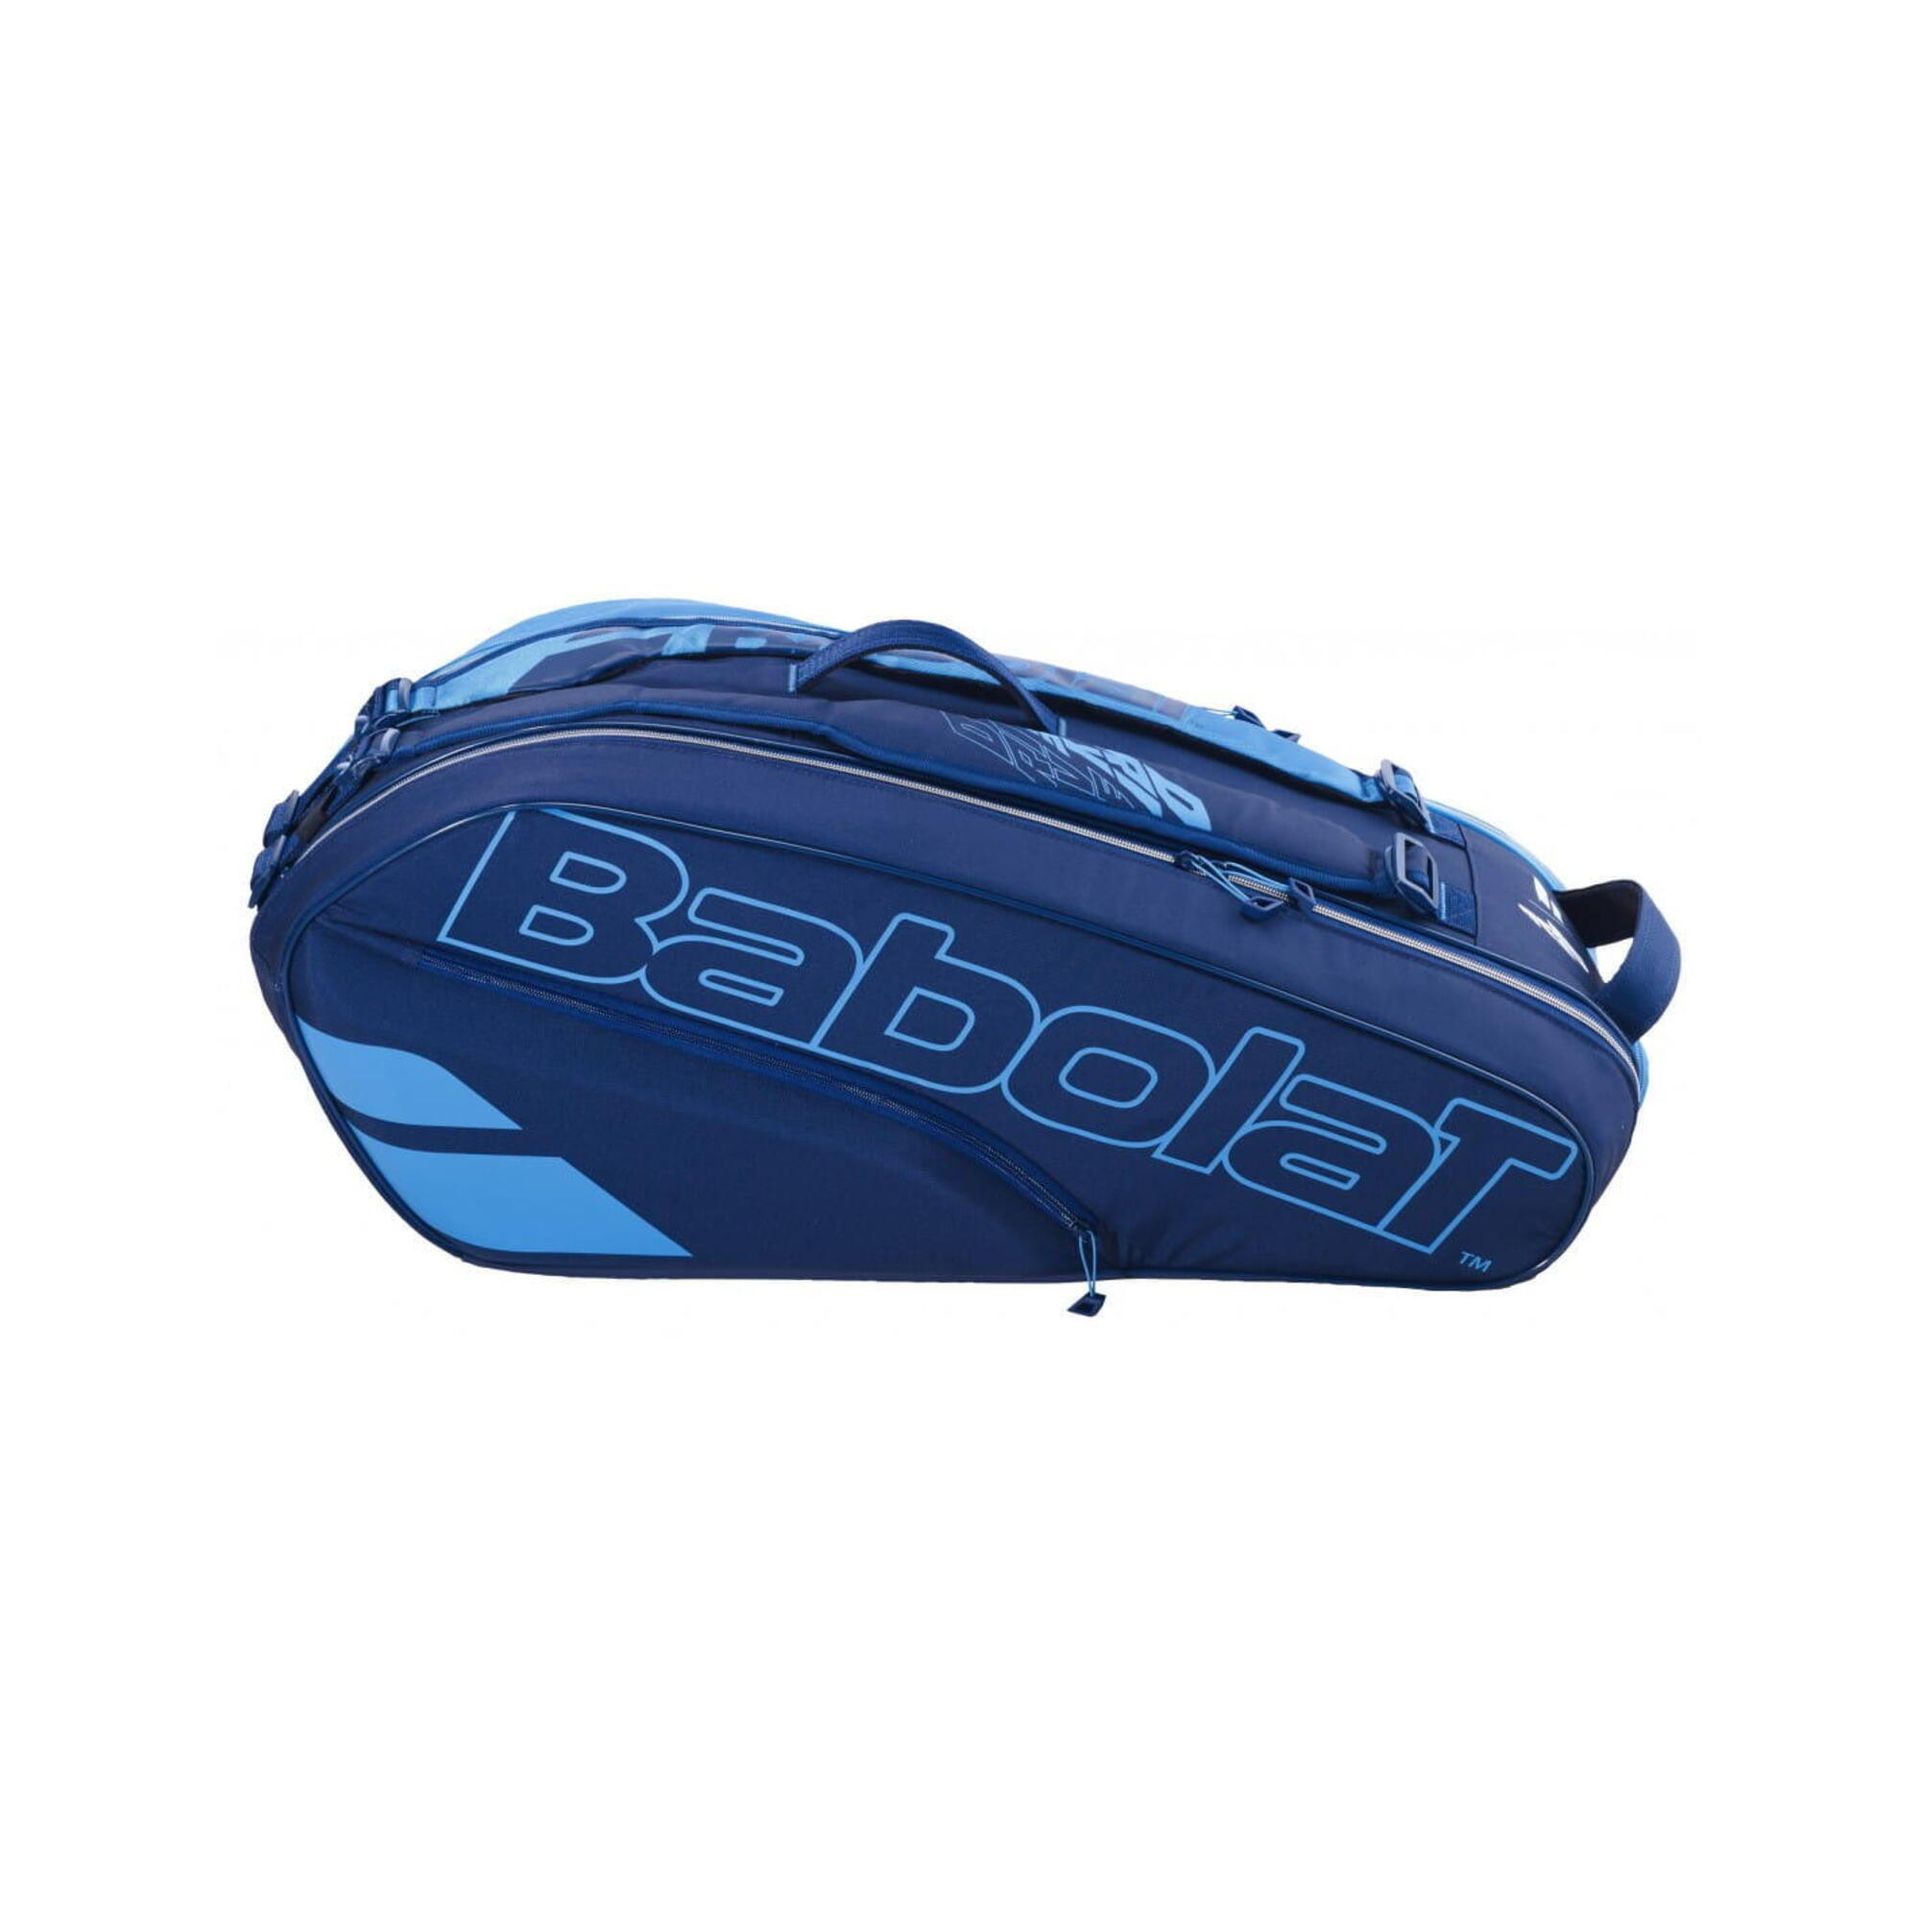 Thermobag Babolat PURE DRIVE 2021 x 6